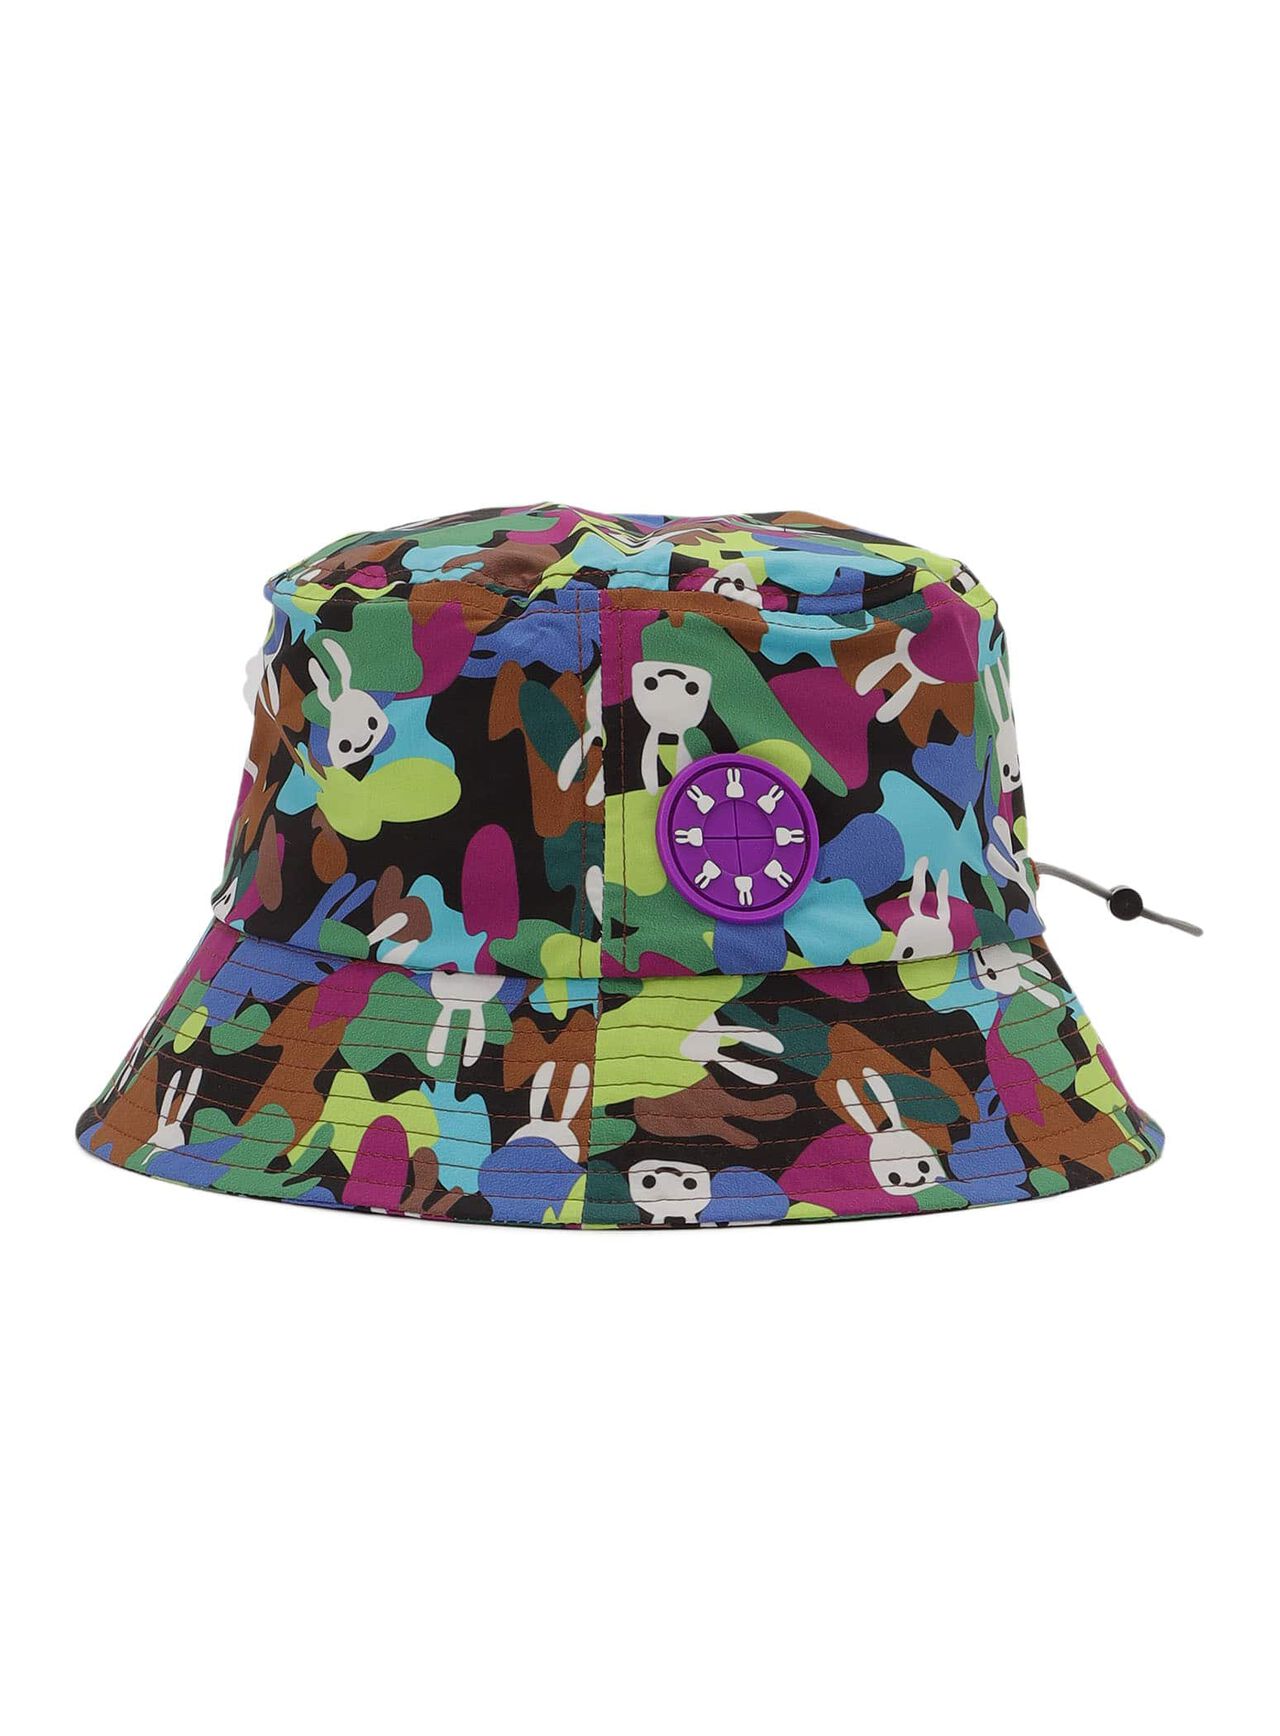 CUNE CAMO Bucket Hat,ONE, large image number 2